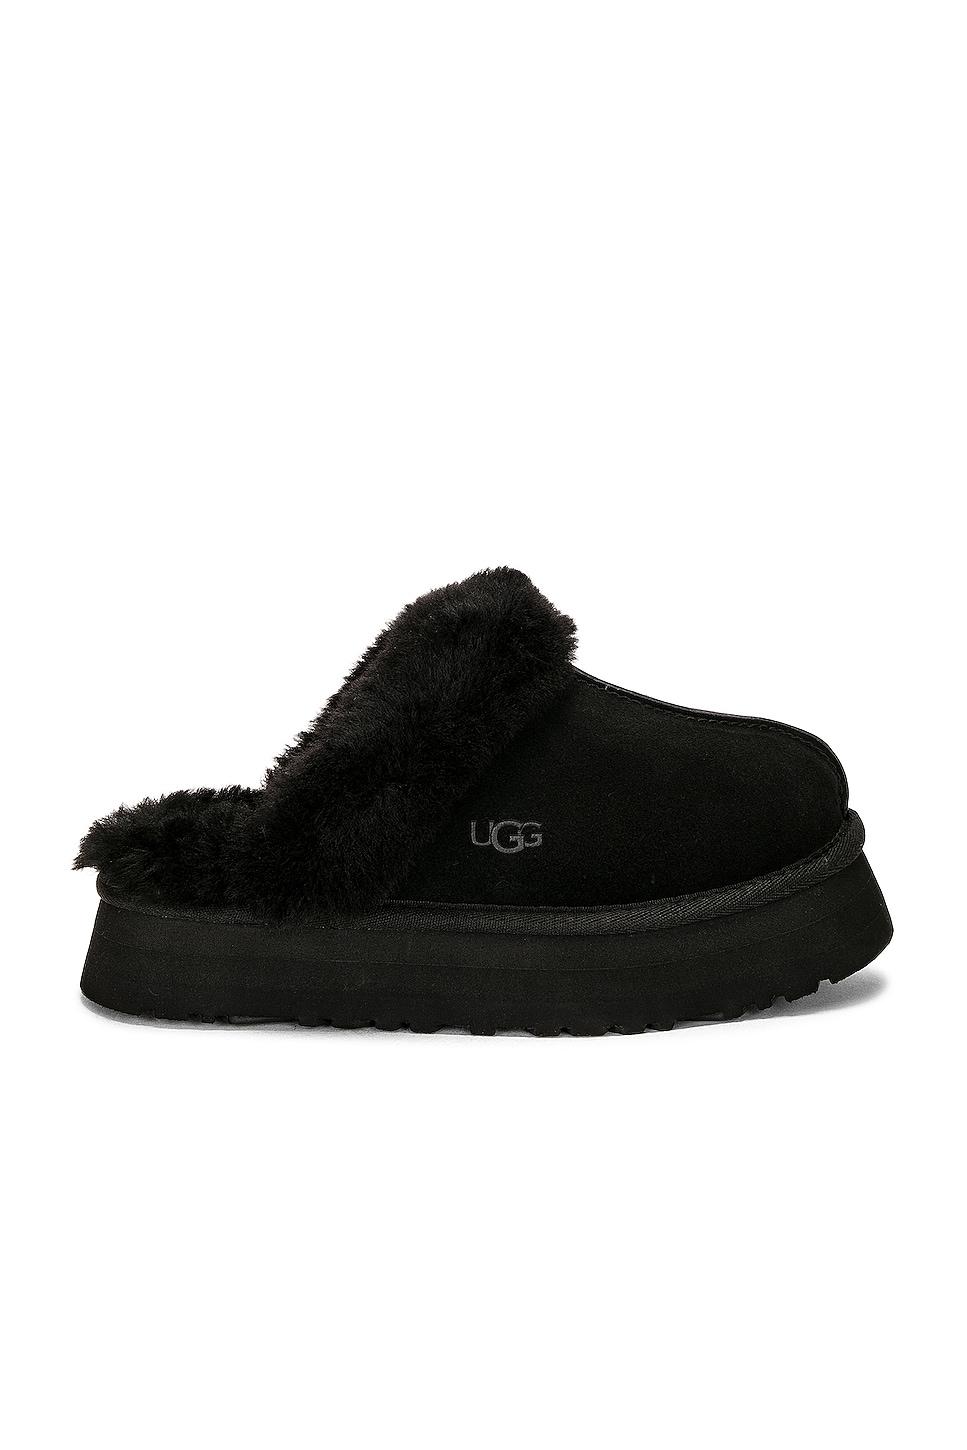 Image 1 of UGG Disquette Slipper in Black